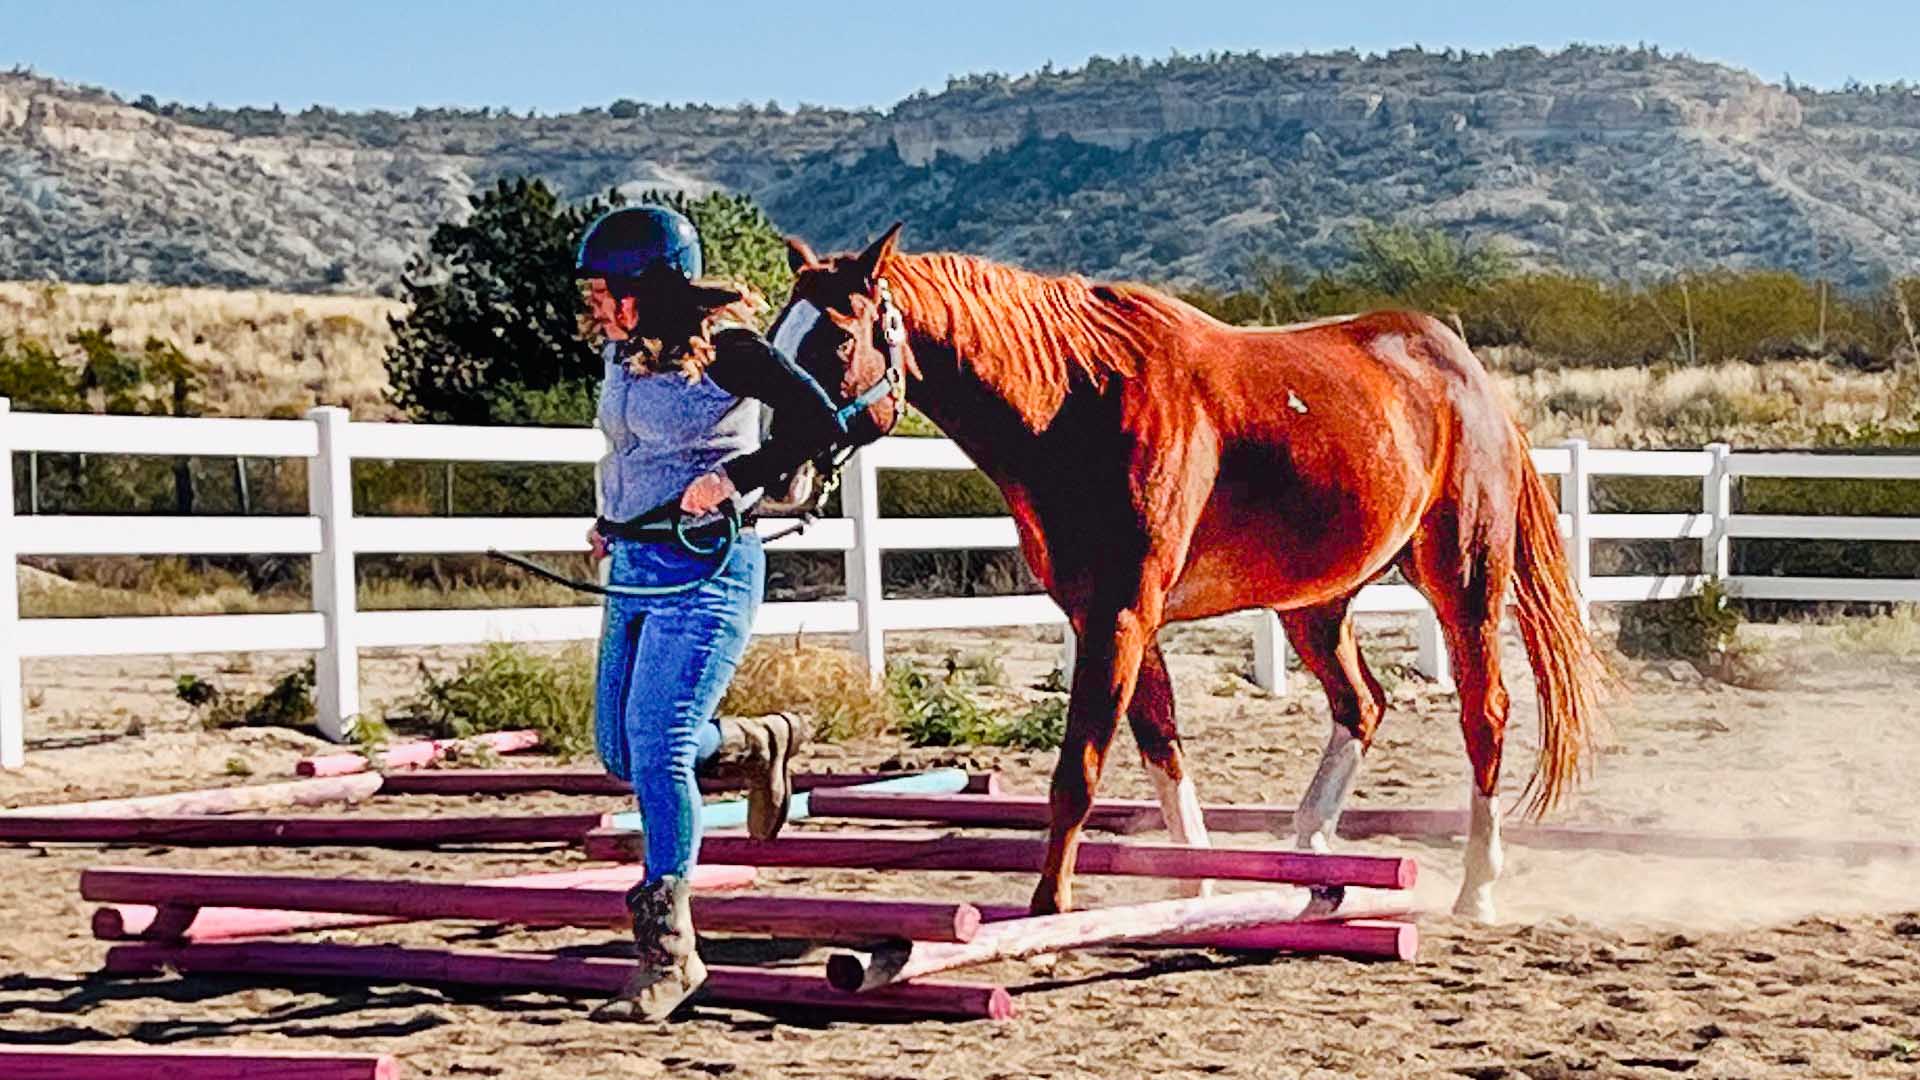 Kelly (Rancher) leads Danny (horse) through a series of obstacles at Rainbow Acres.